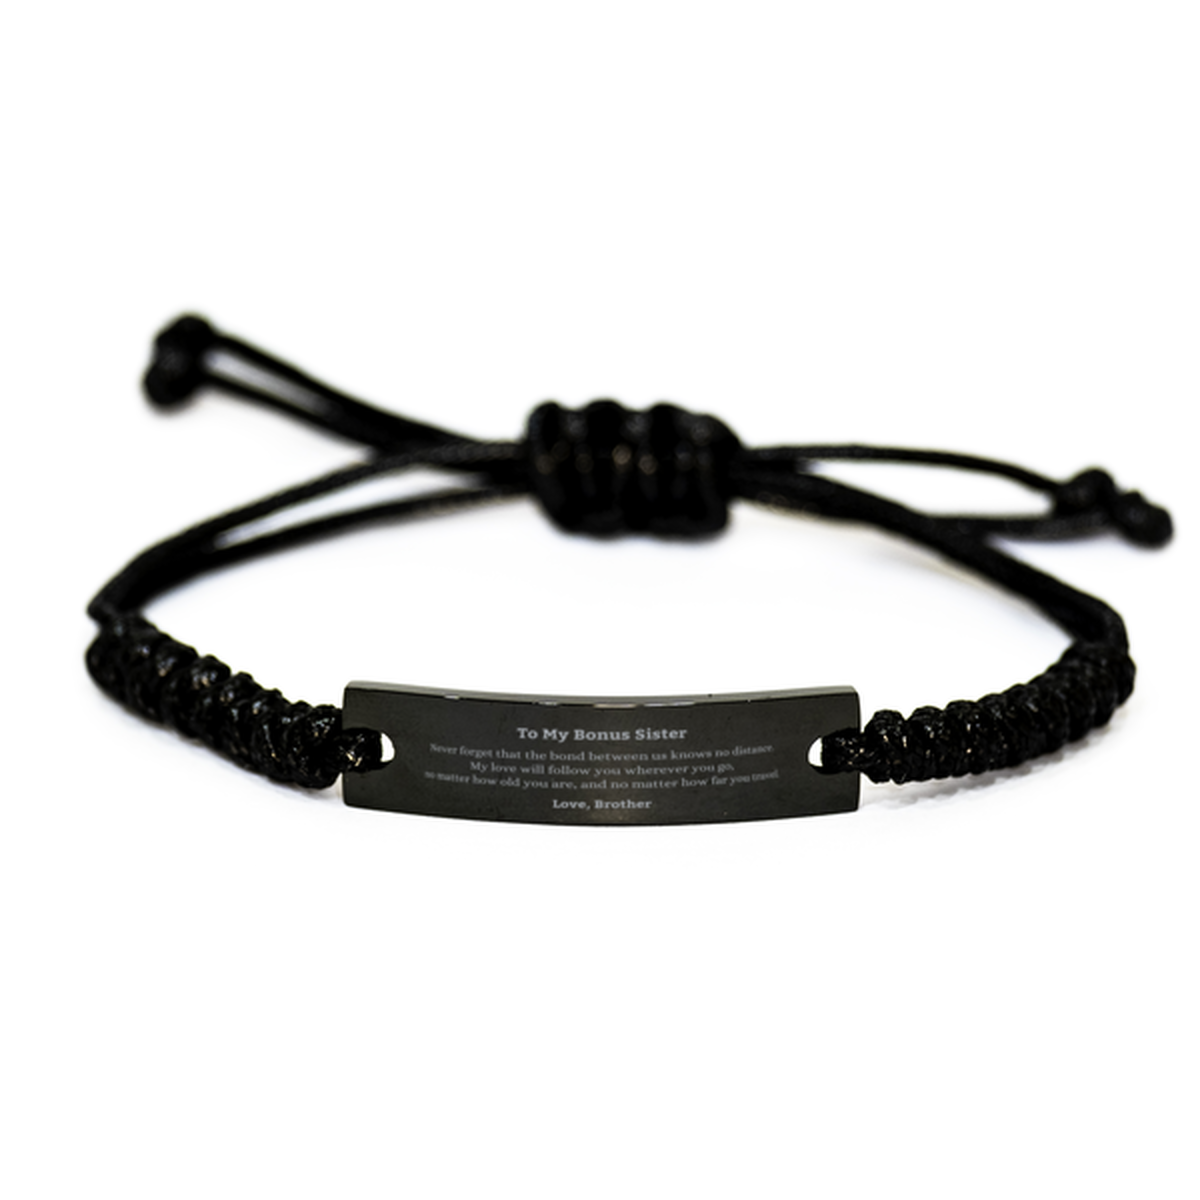 Bonus Sister Birthday Gifts from Brother, Adjustable Black Rope Bracelet for Bonus Sister Christmas Graduation Unique Gifts Bonus Sister Never forget that the bond between us knows no distance. Love, Brother